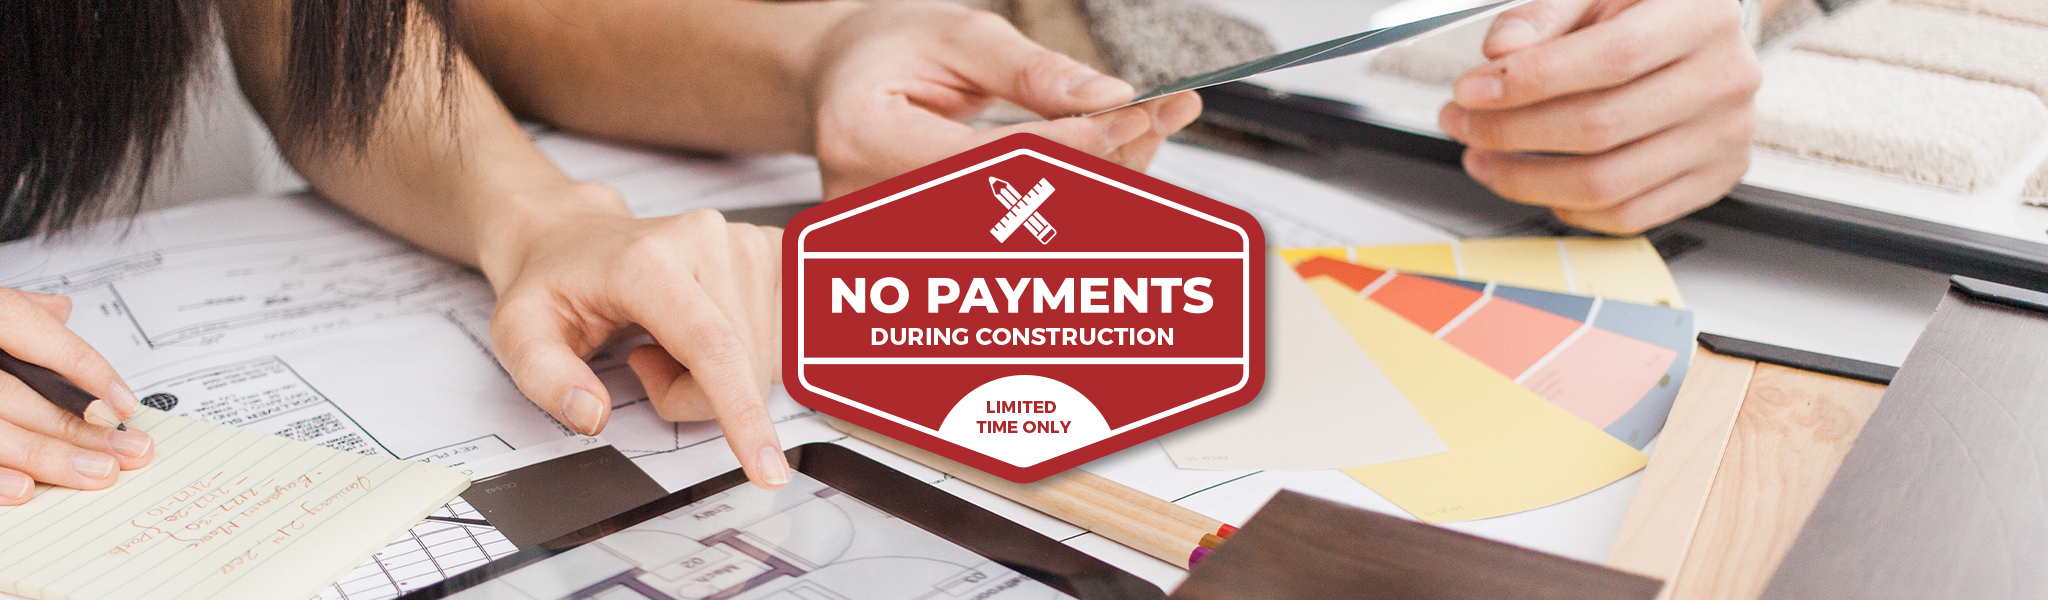 No Payments During Construction